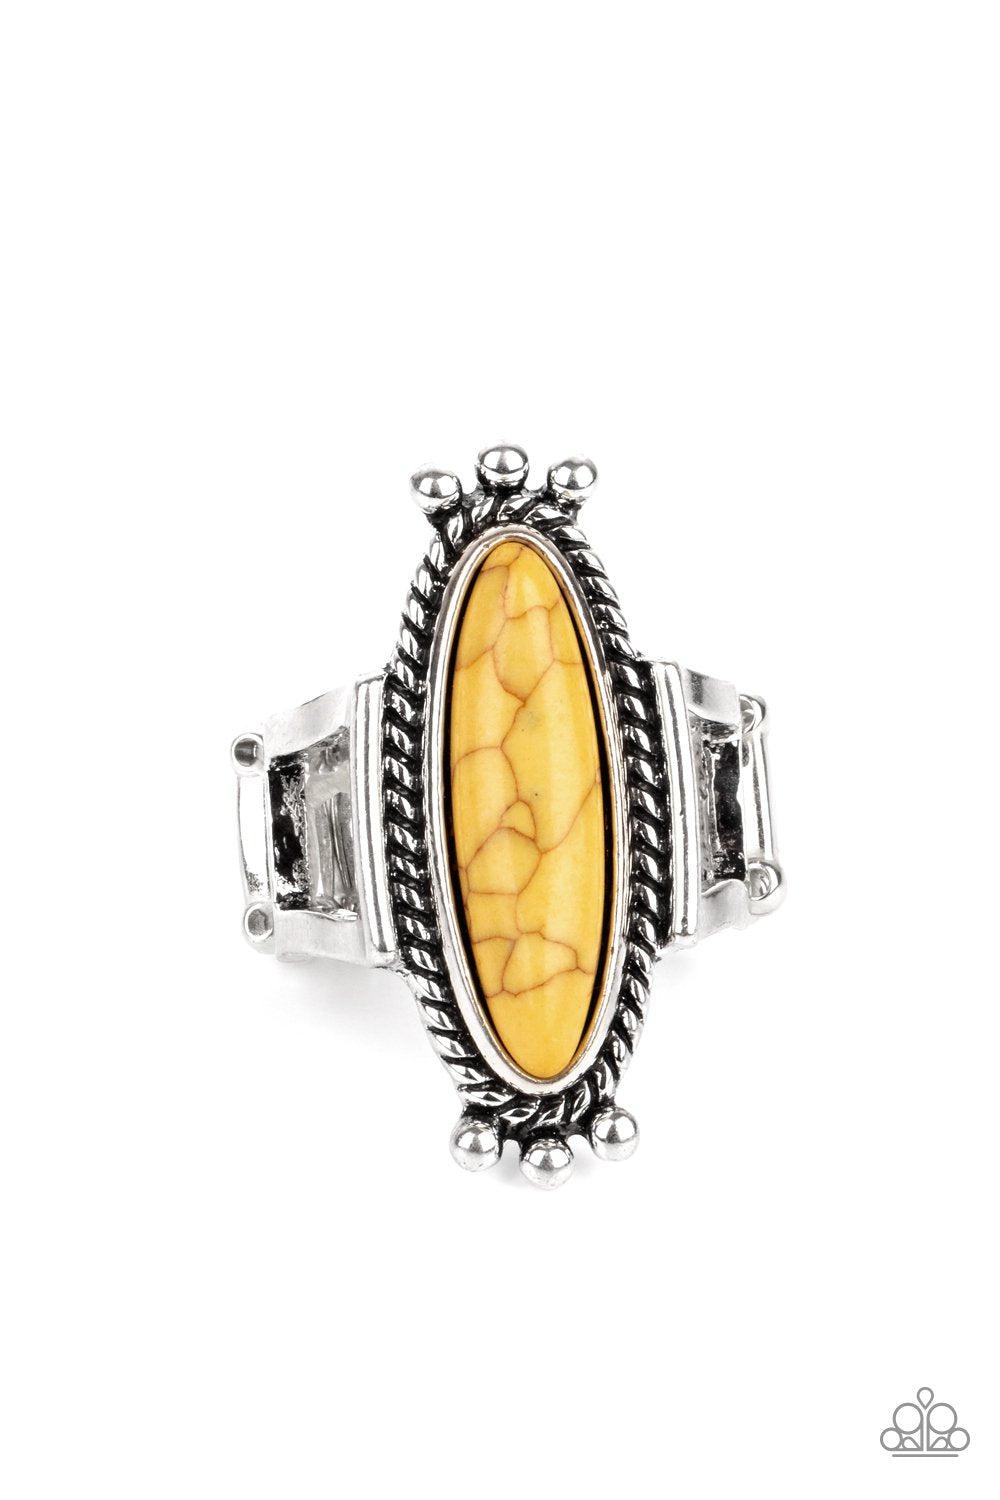 Sahara Escape Yellow Stone Ring - Paparazzi Accessories- lightbox - CarasShop.com - $5 Jewelry by Cara Jewels